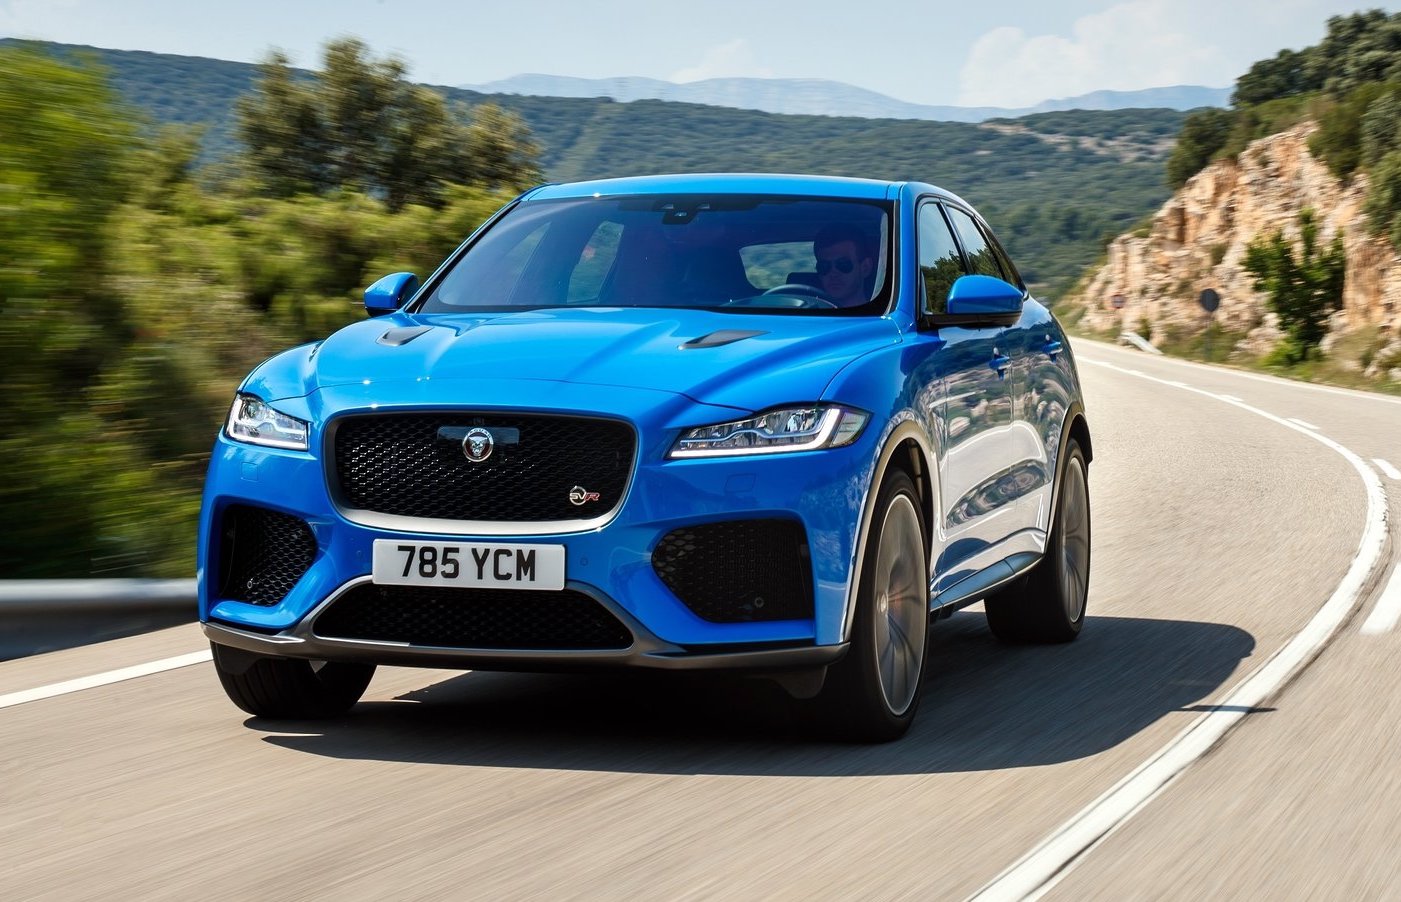 Jaguar J-Pace SUV confirmed, small ‘A-Pace’ possible